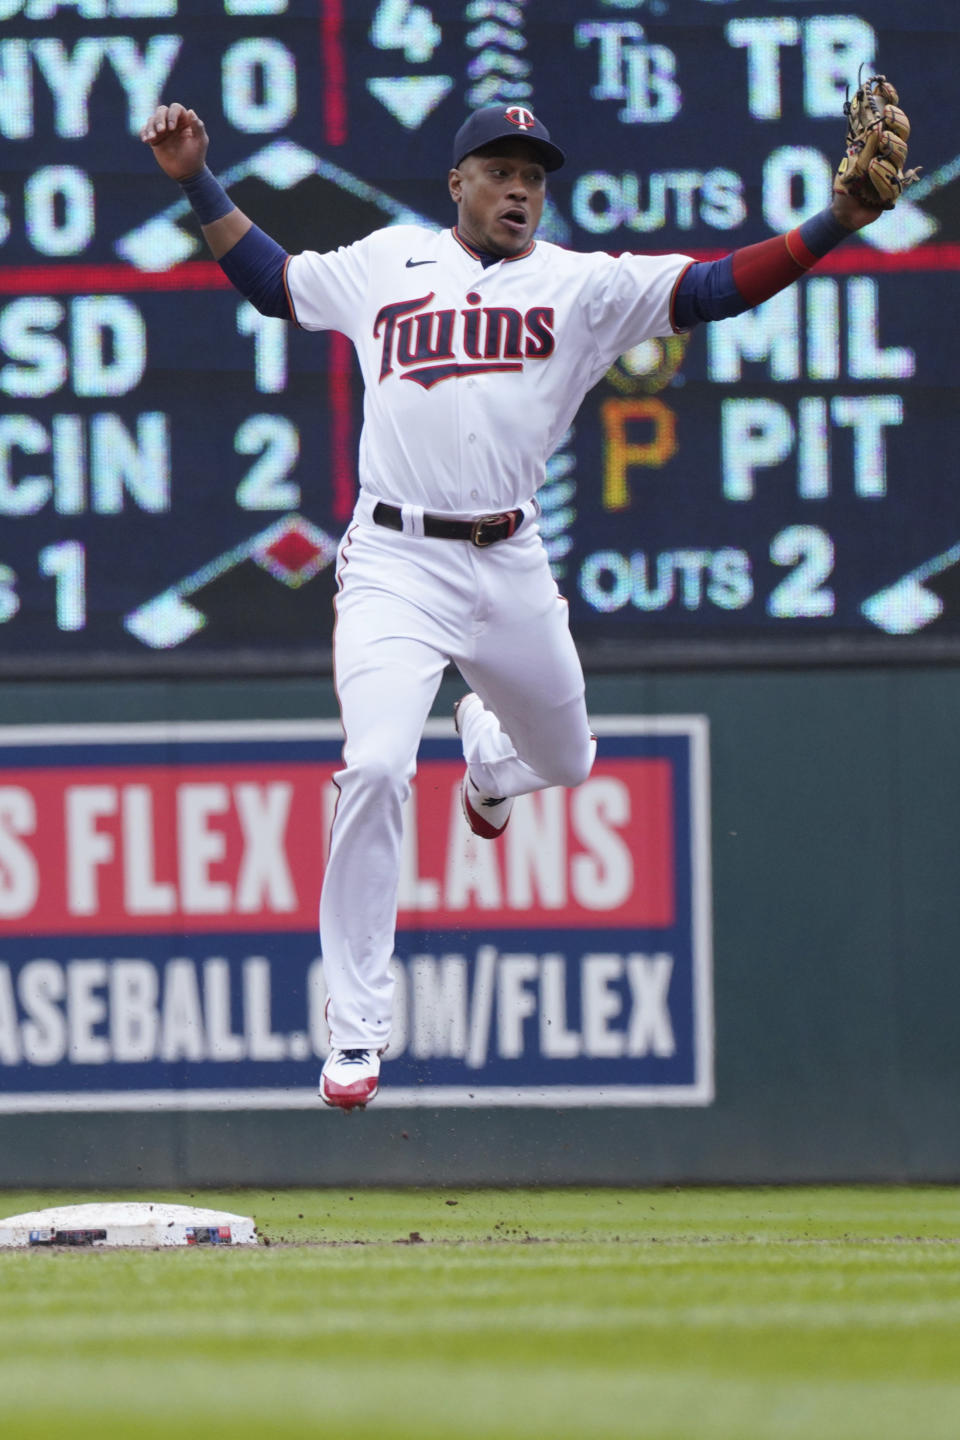 Minnesota Twins second baseman Jorge Polanco goes high for the throw on a successful steal by Detroit Tigers' Jonathan Schoop in the fourth inning of a baseball game, Thursday, April 28, 2022, in Minneapolis. (AP Photo/Jim Mone)